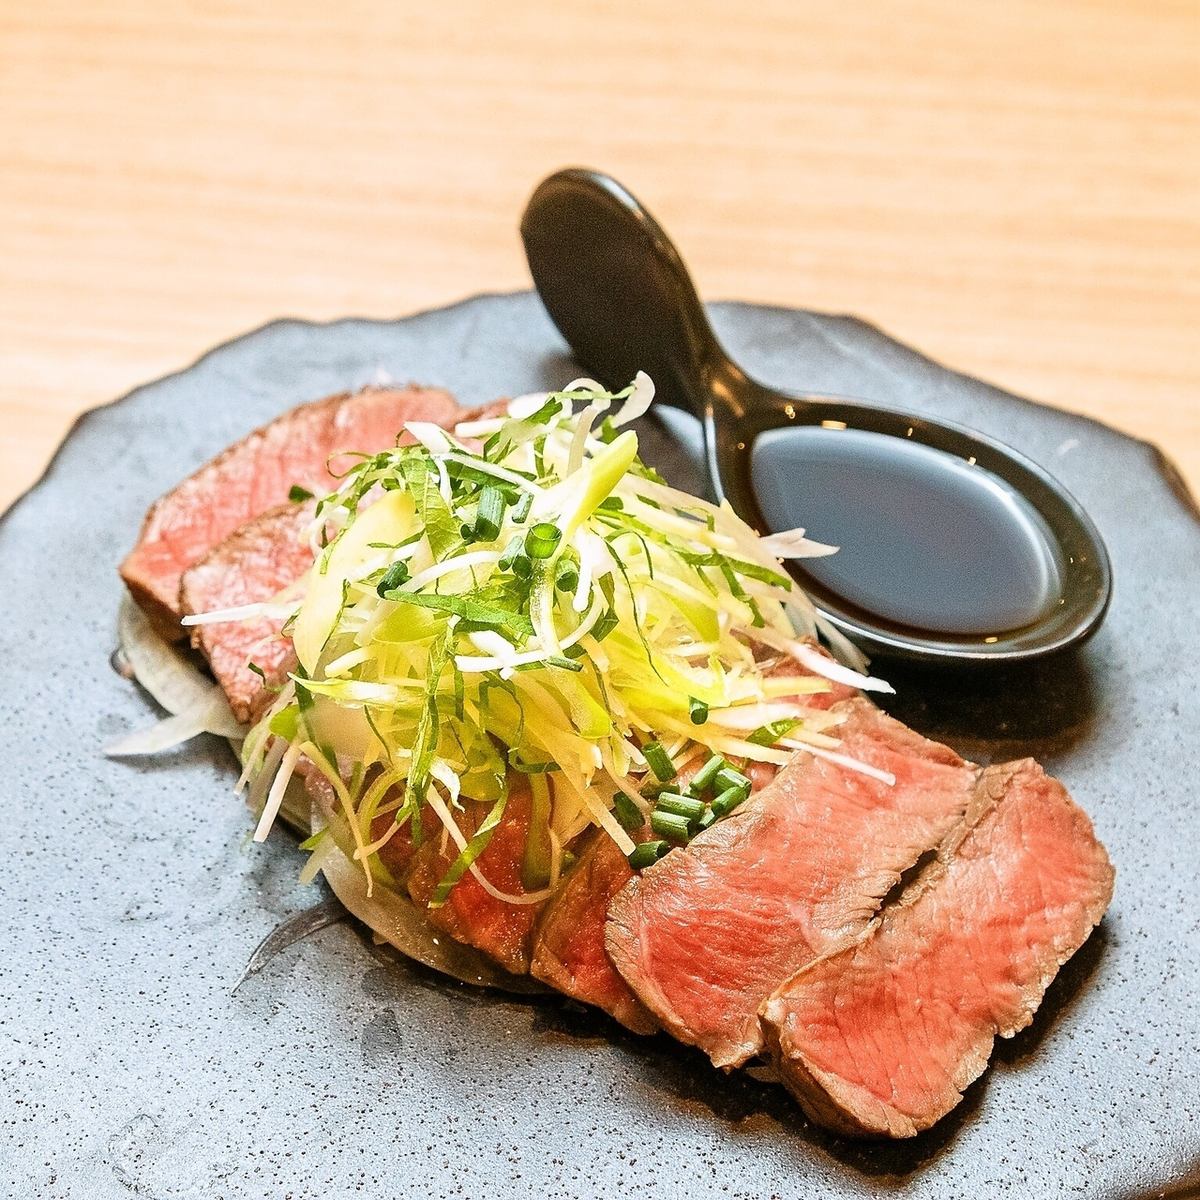 There are many highly recommended menus such as [Beef tataki with plenty of seasonings]!